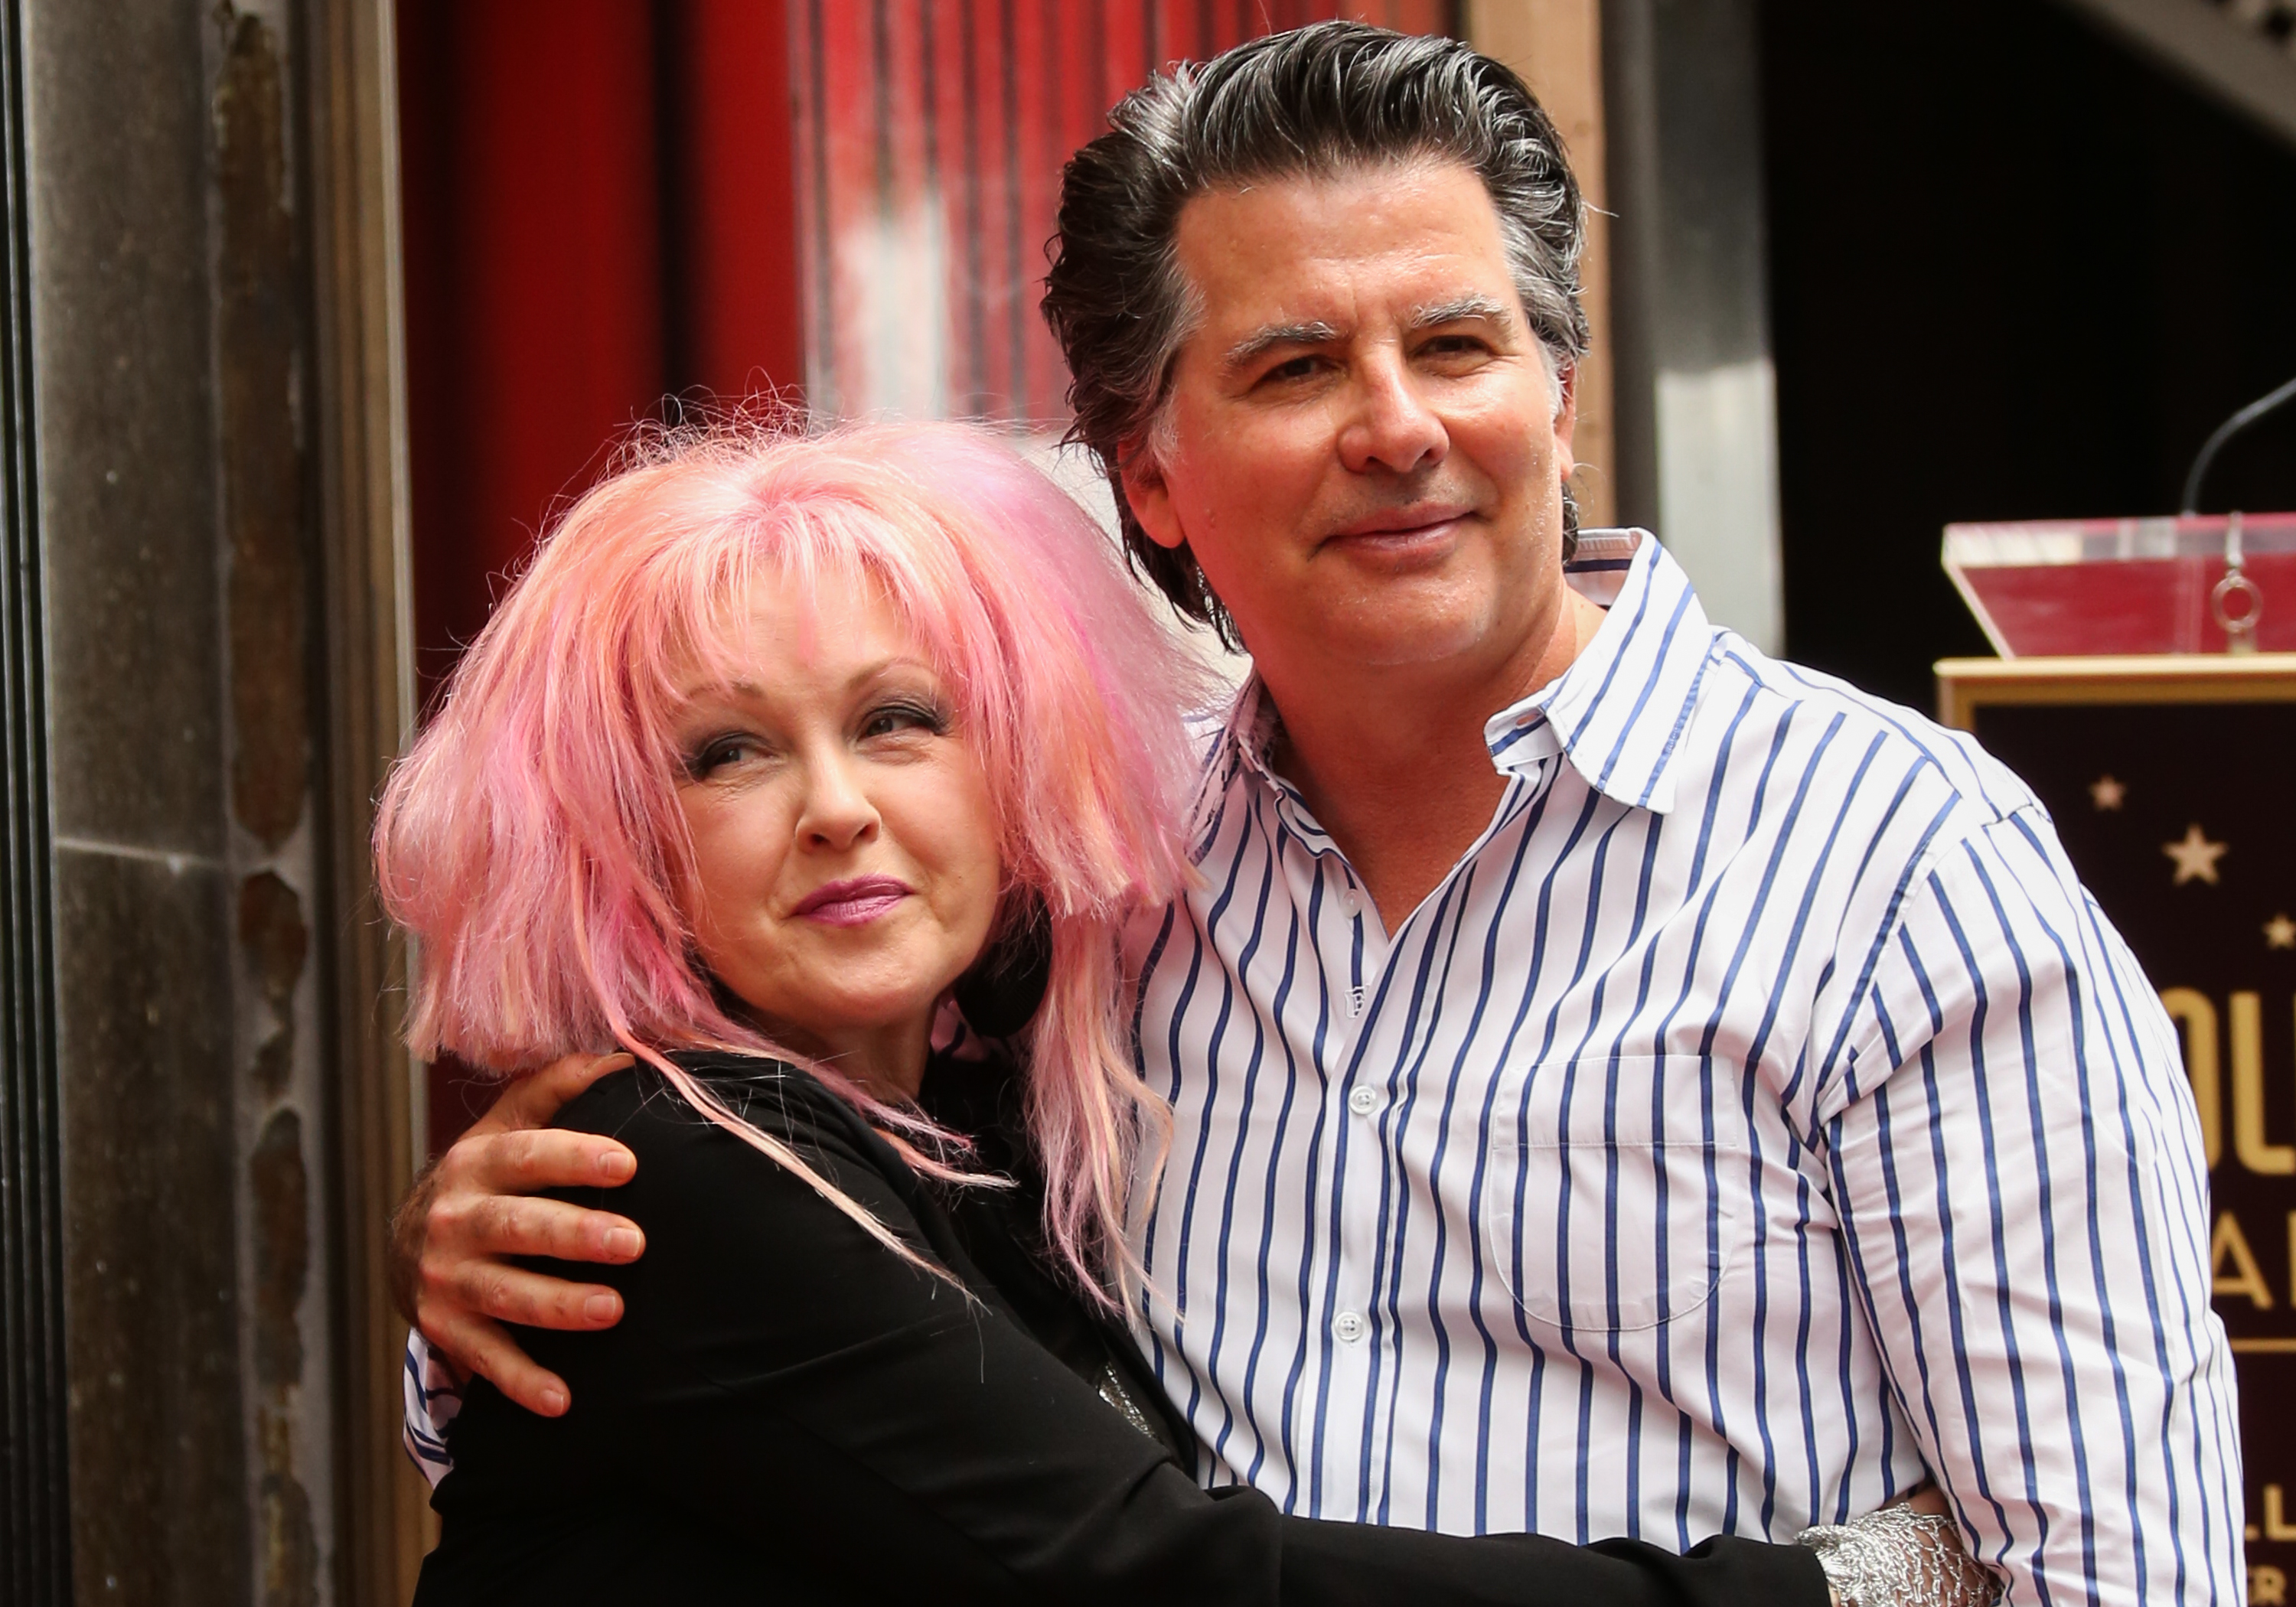 Cyndi Lauper and David Thornton at the ceremony to honor the singer and Harvey Fierstein as they both received stars on The Hollywood Walk of Fame on April 11, 2016, in Hollywood, California | Source: Getty Images